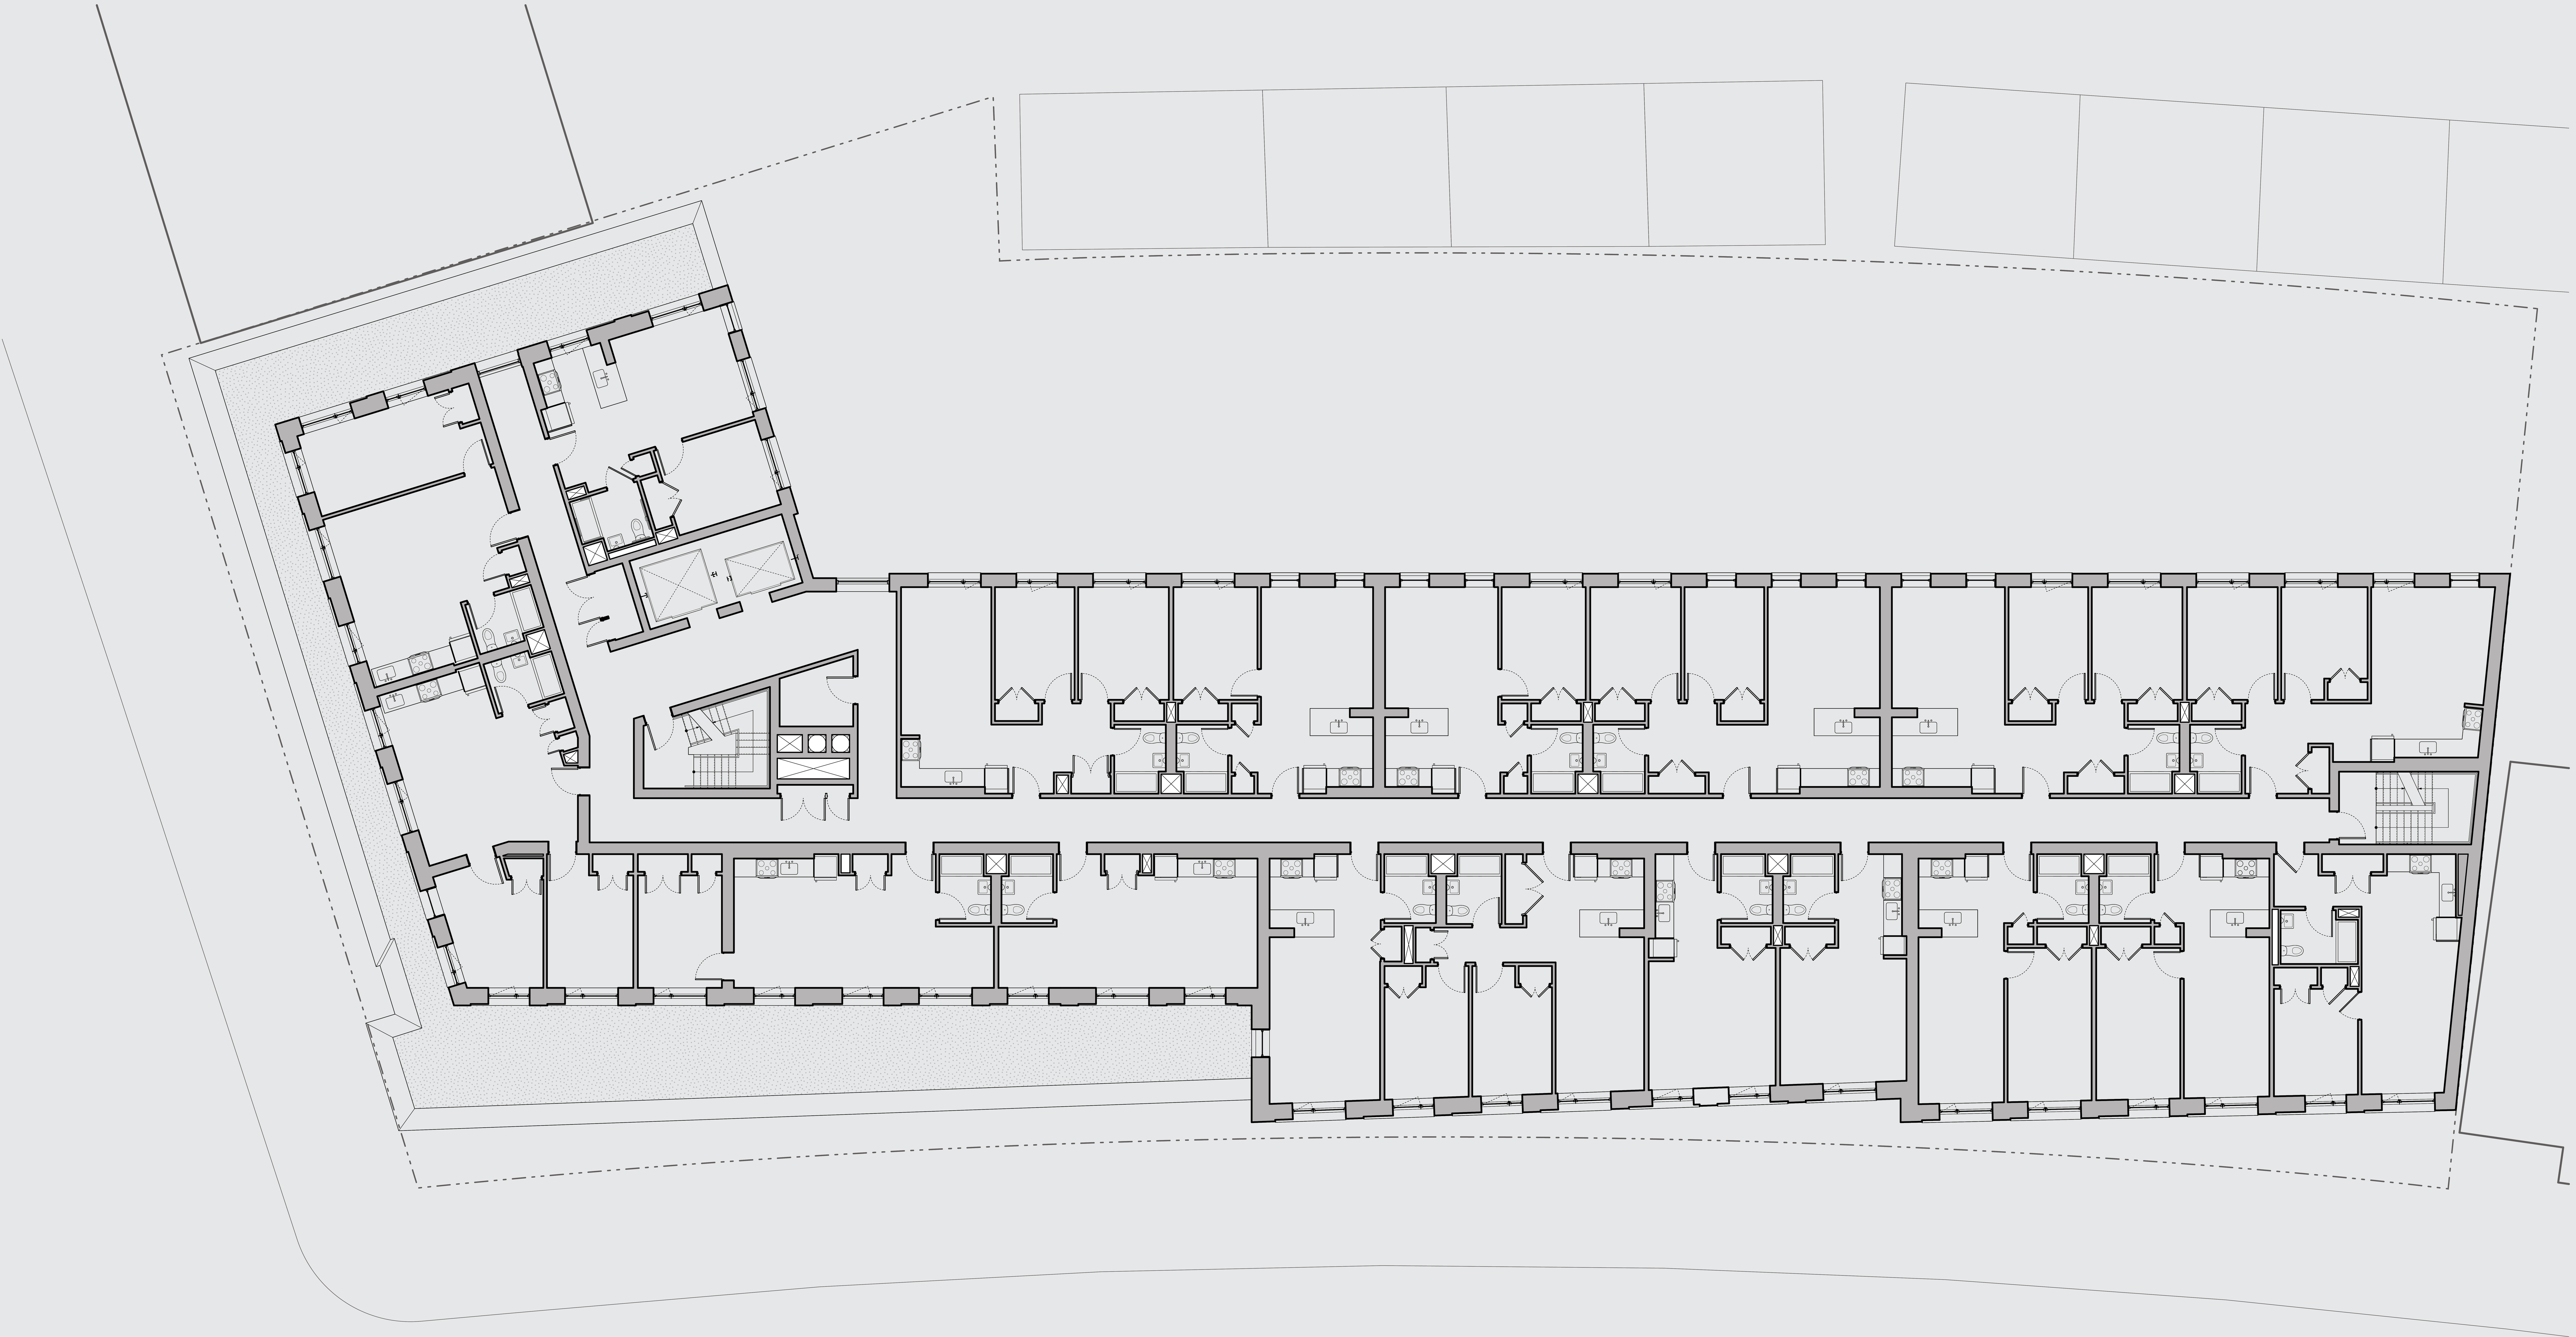 Typical upper floor plan of the Woodhaven